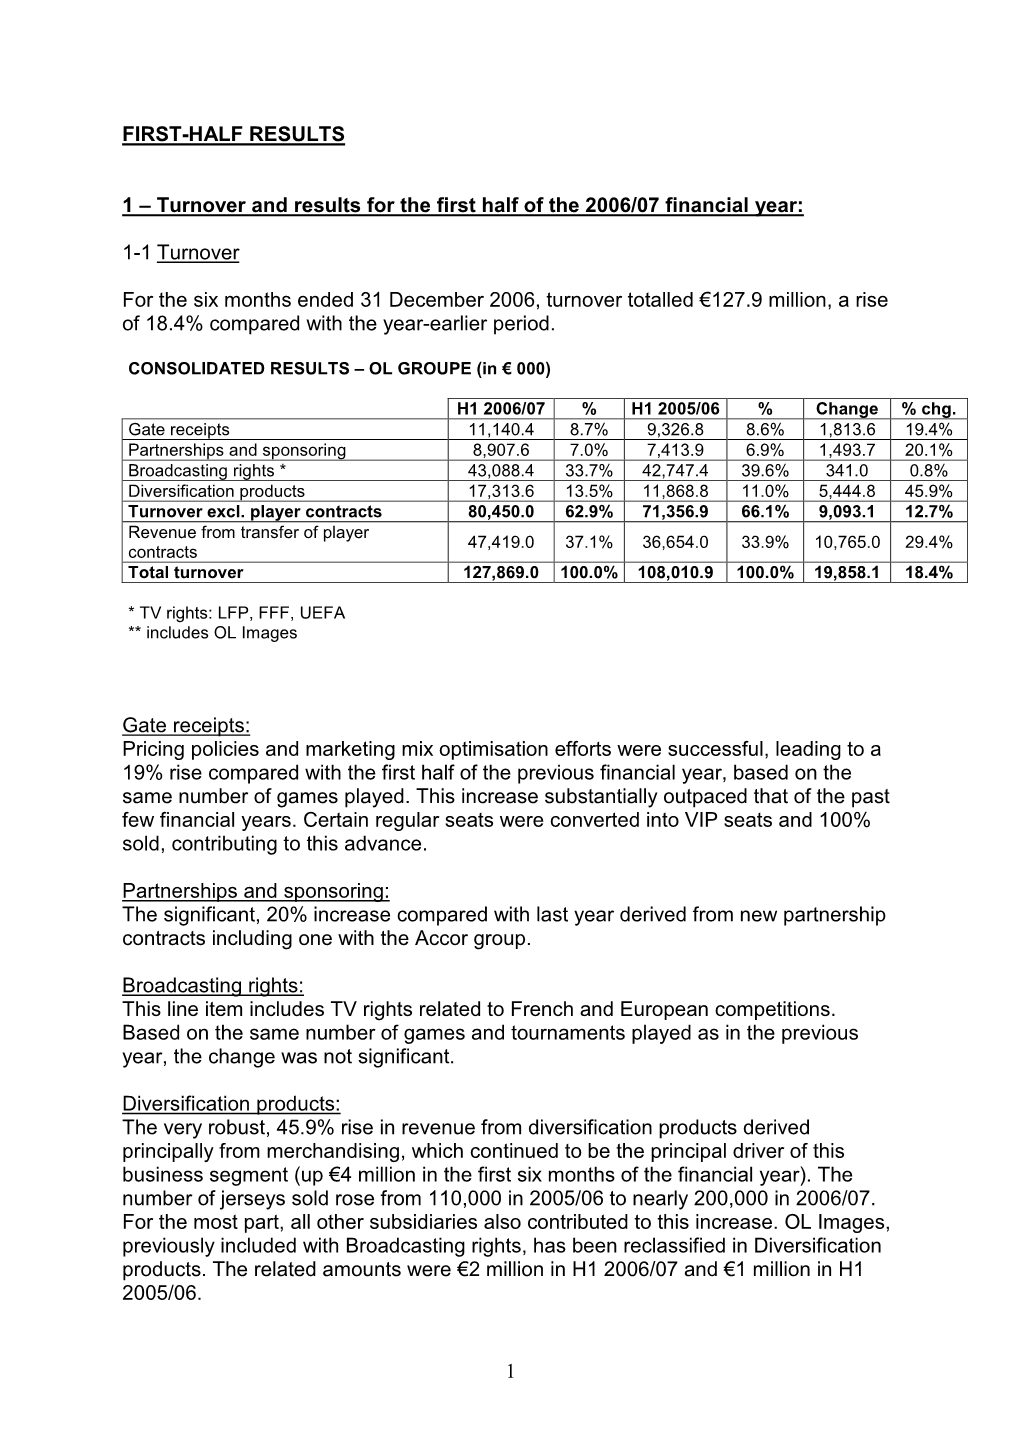 Turnover and Results for the First Half of the 2006/07 Financial Year